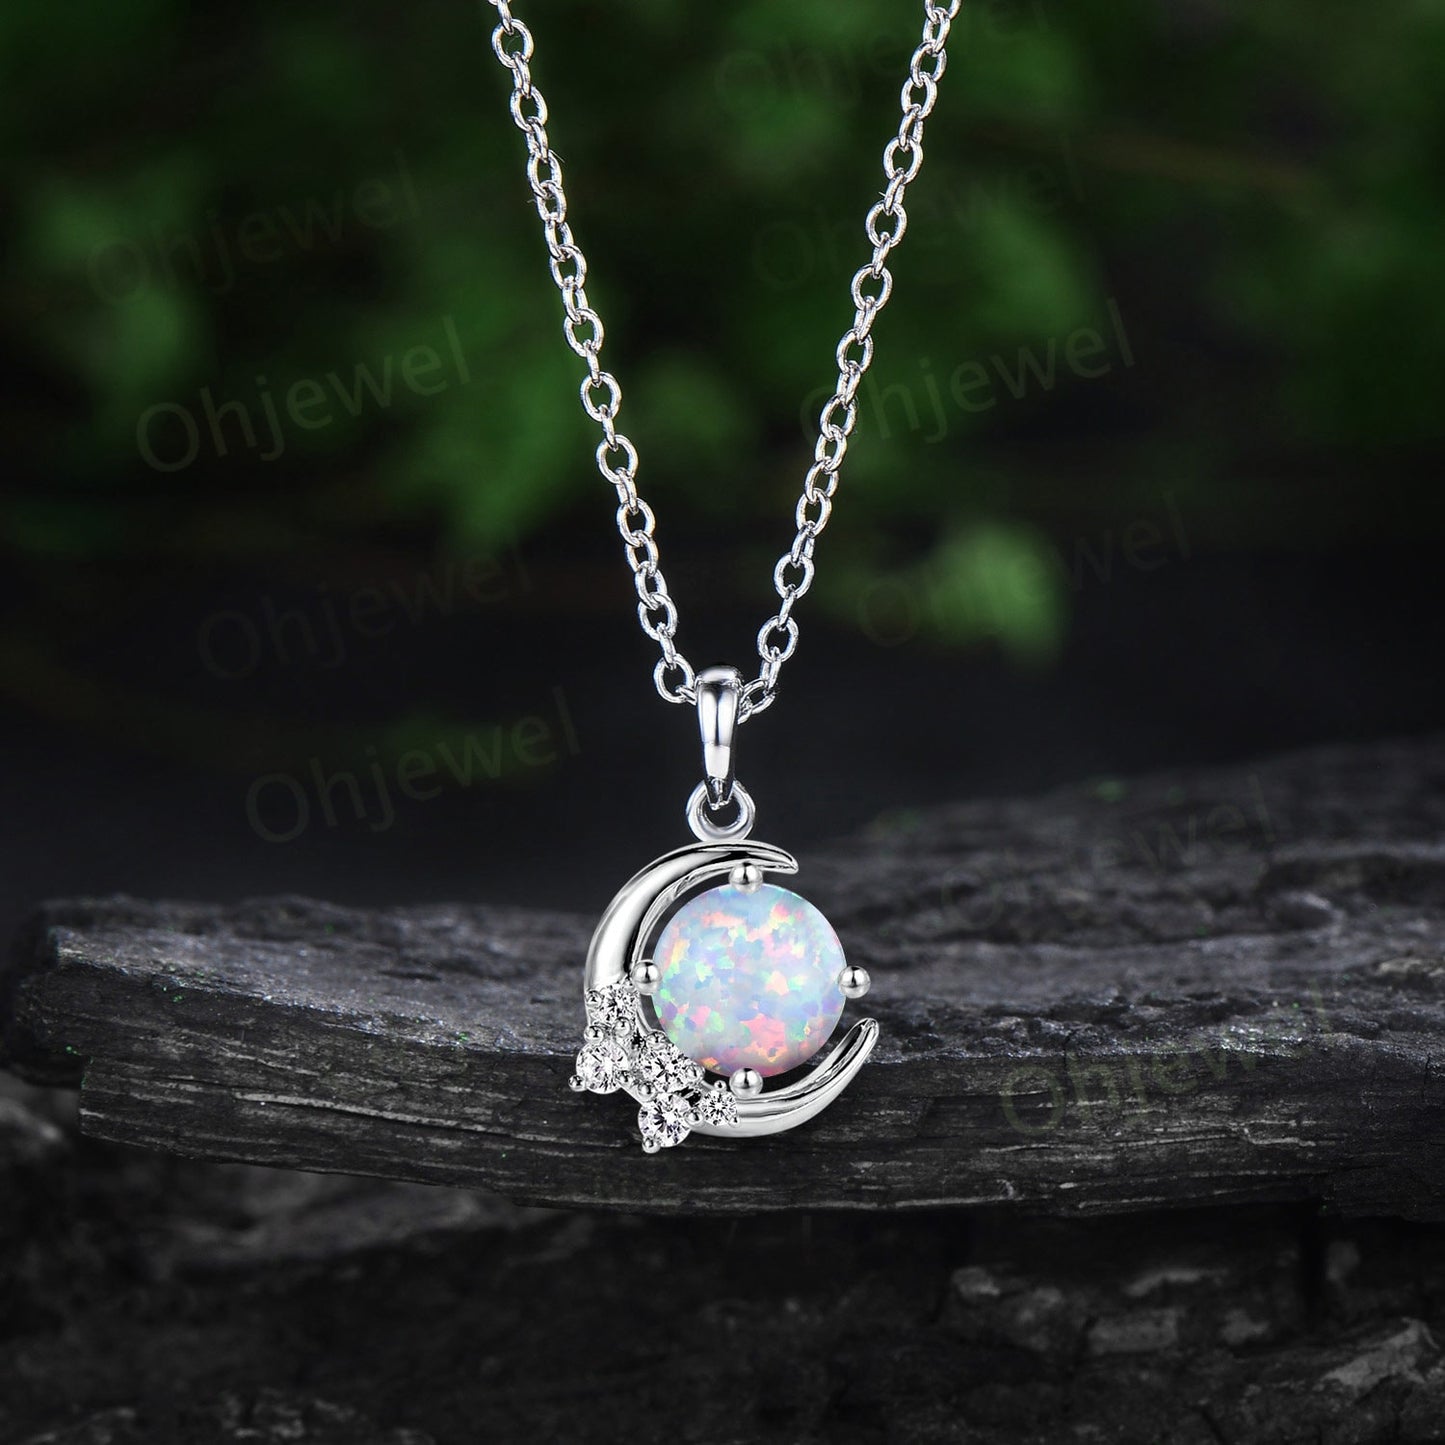 Vintage round white opal necklace 14k rose gold Personalized dainty moon cluster diamond unique Pendant women birthday anniversary gift